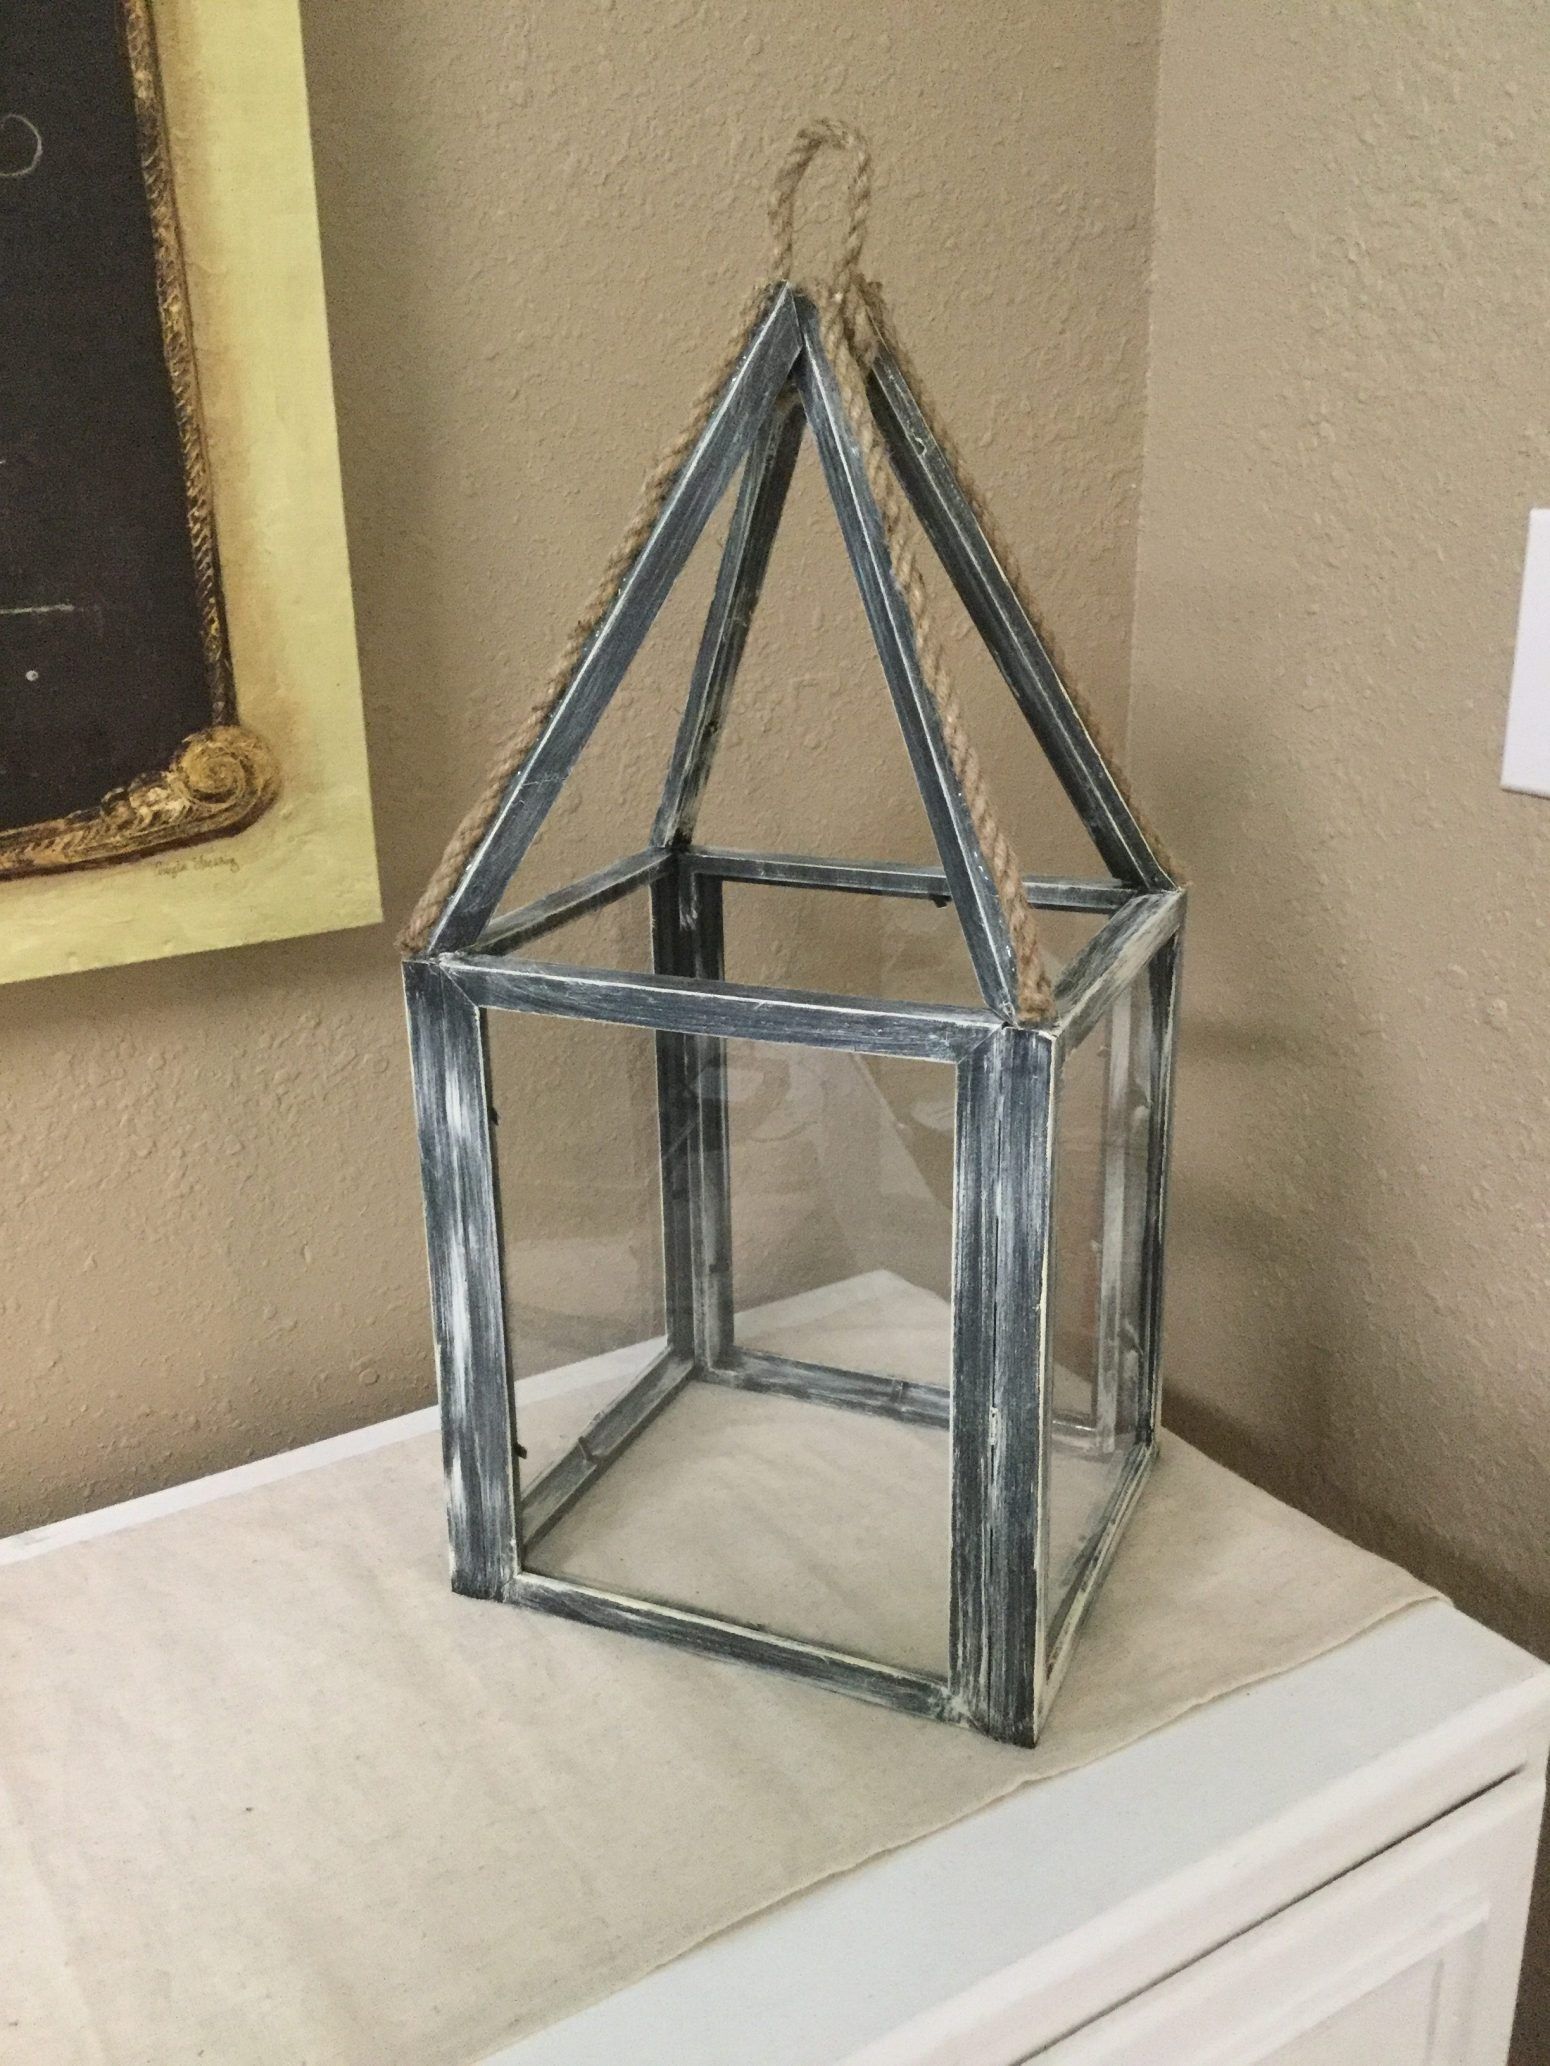 How To Make A Dollar Tree Picture Frame Lantern - Love To Frugal - How To Make A Dollar Tree Picture Frame Lantern - Love To Frugal -   14 diy Dollar Tree lantern ideas